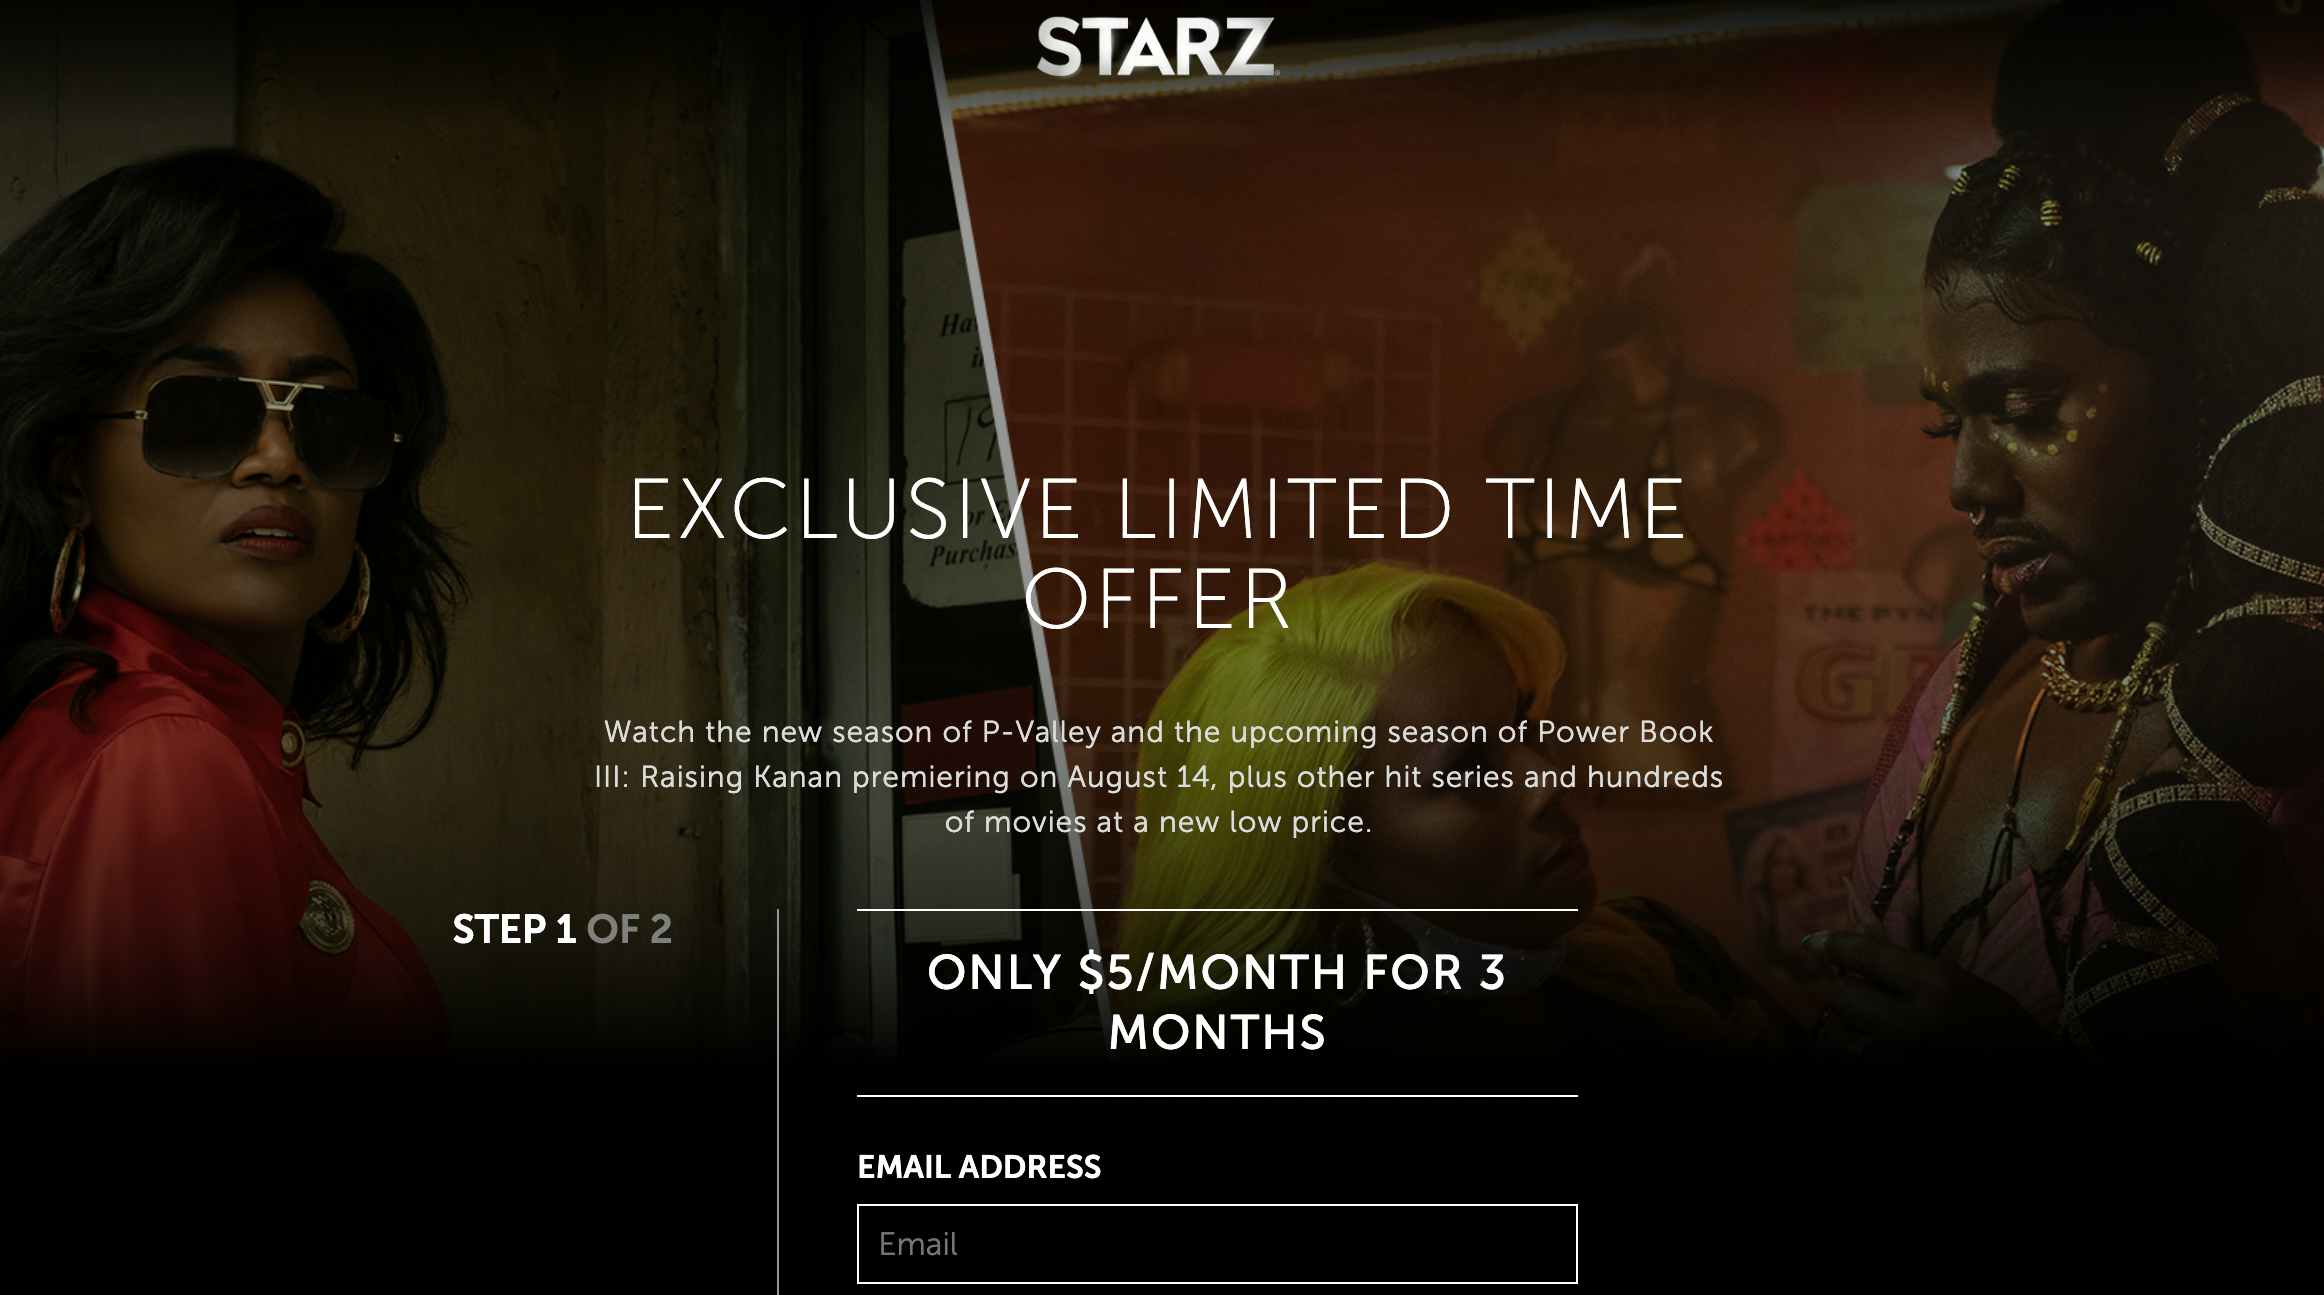 special deals page from Starz